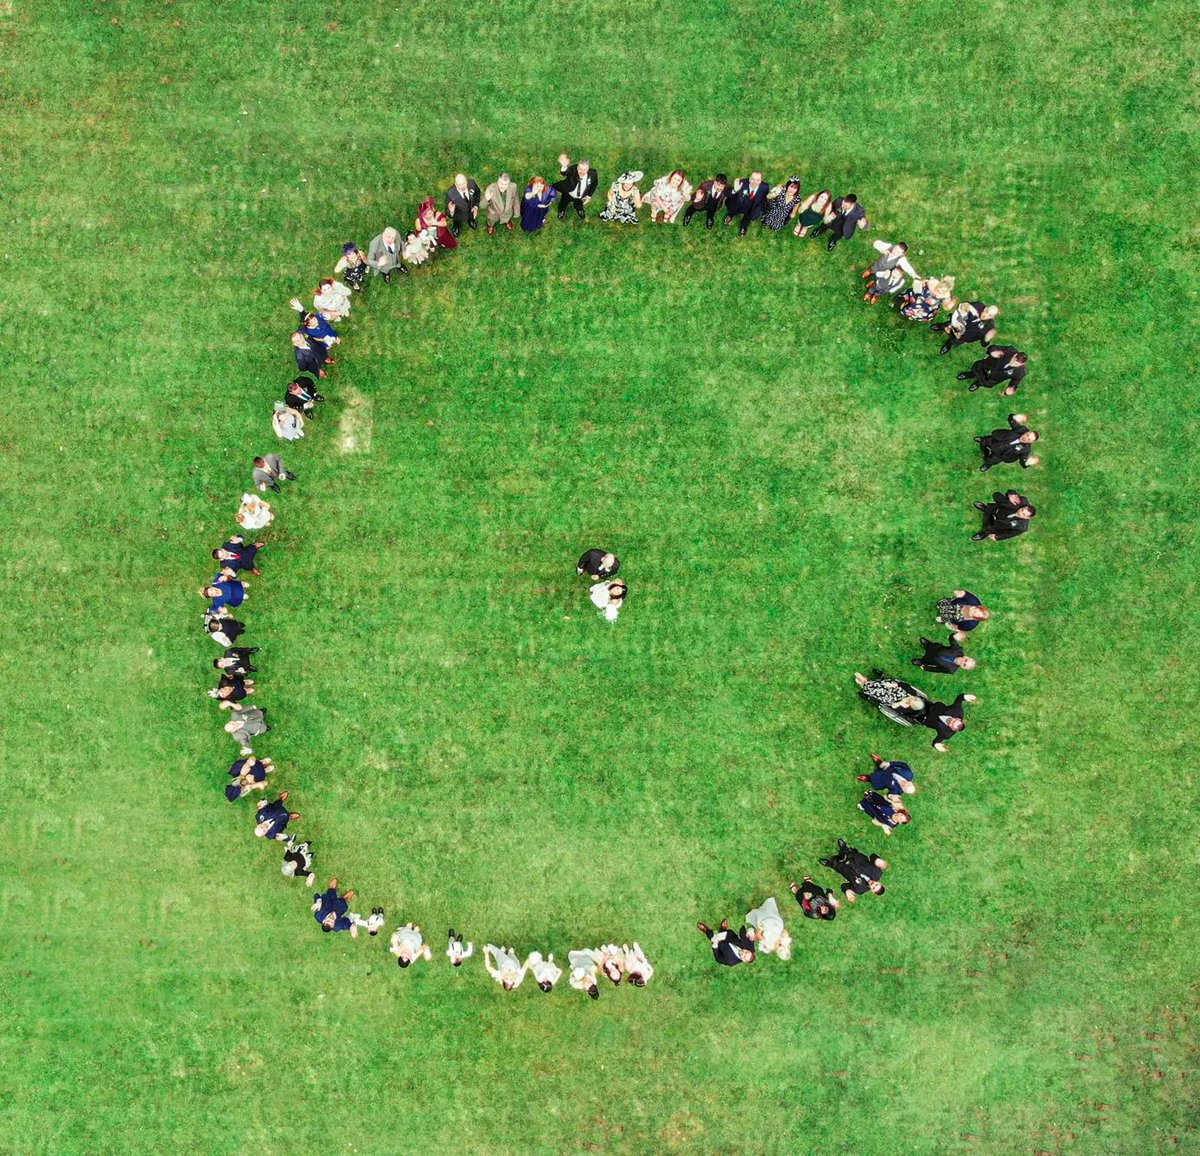 Shoot from the skies!
📷 Looking for unique perspectives? Let's get creative with group shots and the rest! Your wedding party will look spectacular from every angle, especially with the drone!
#CreativeAngles #GroupMagic #CaptureTheMoment #dronephotography #weddingphotographer